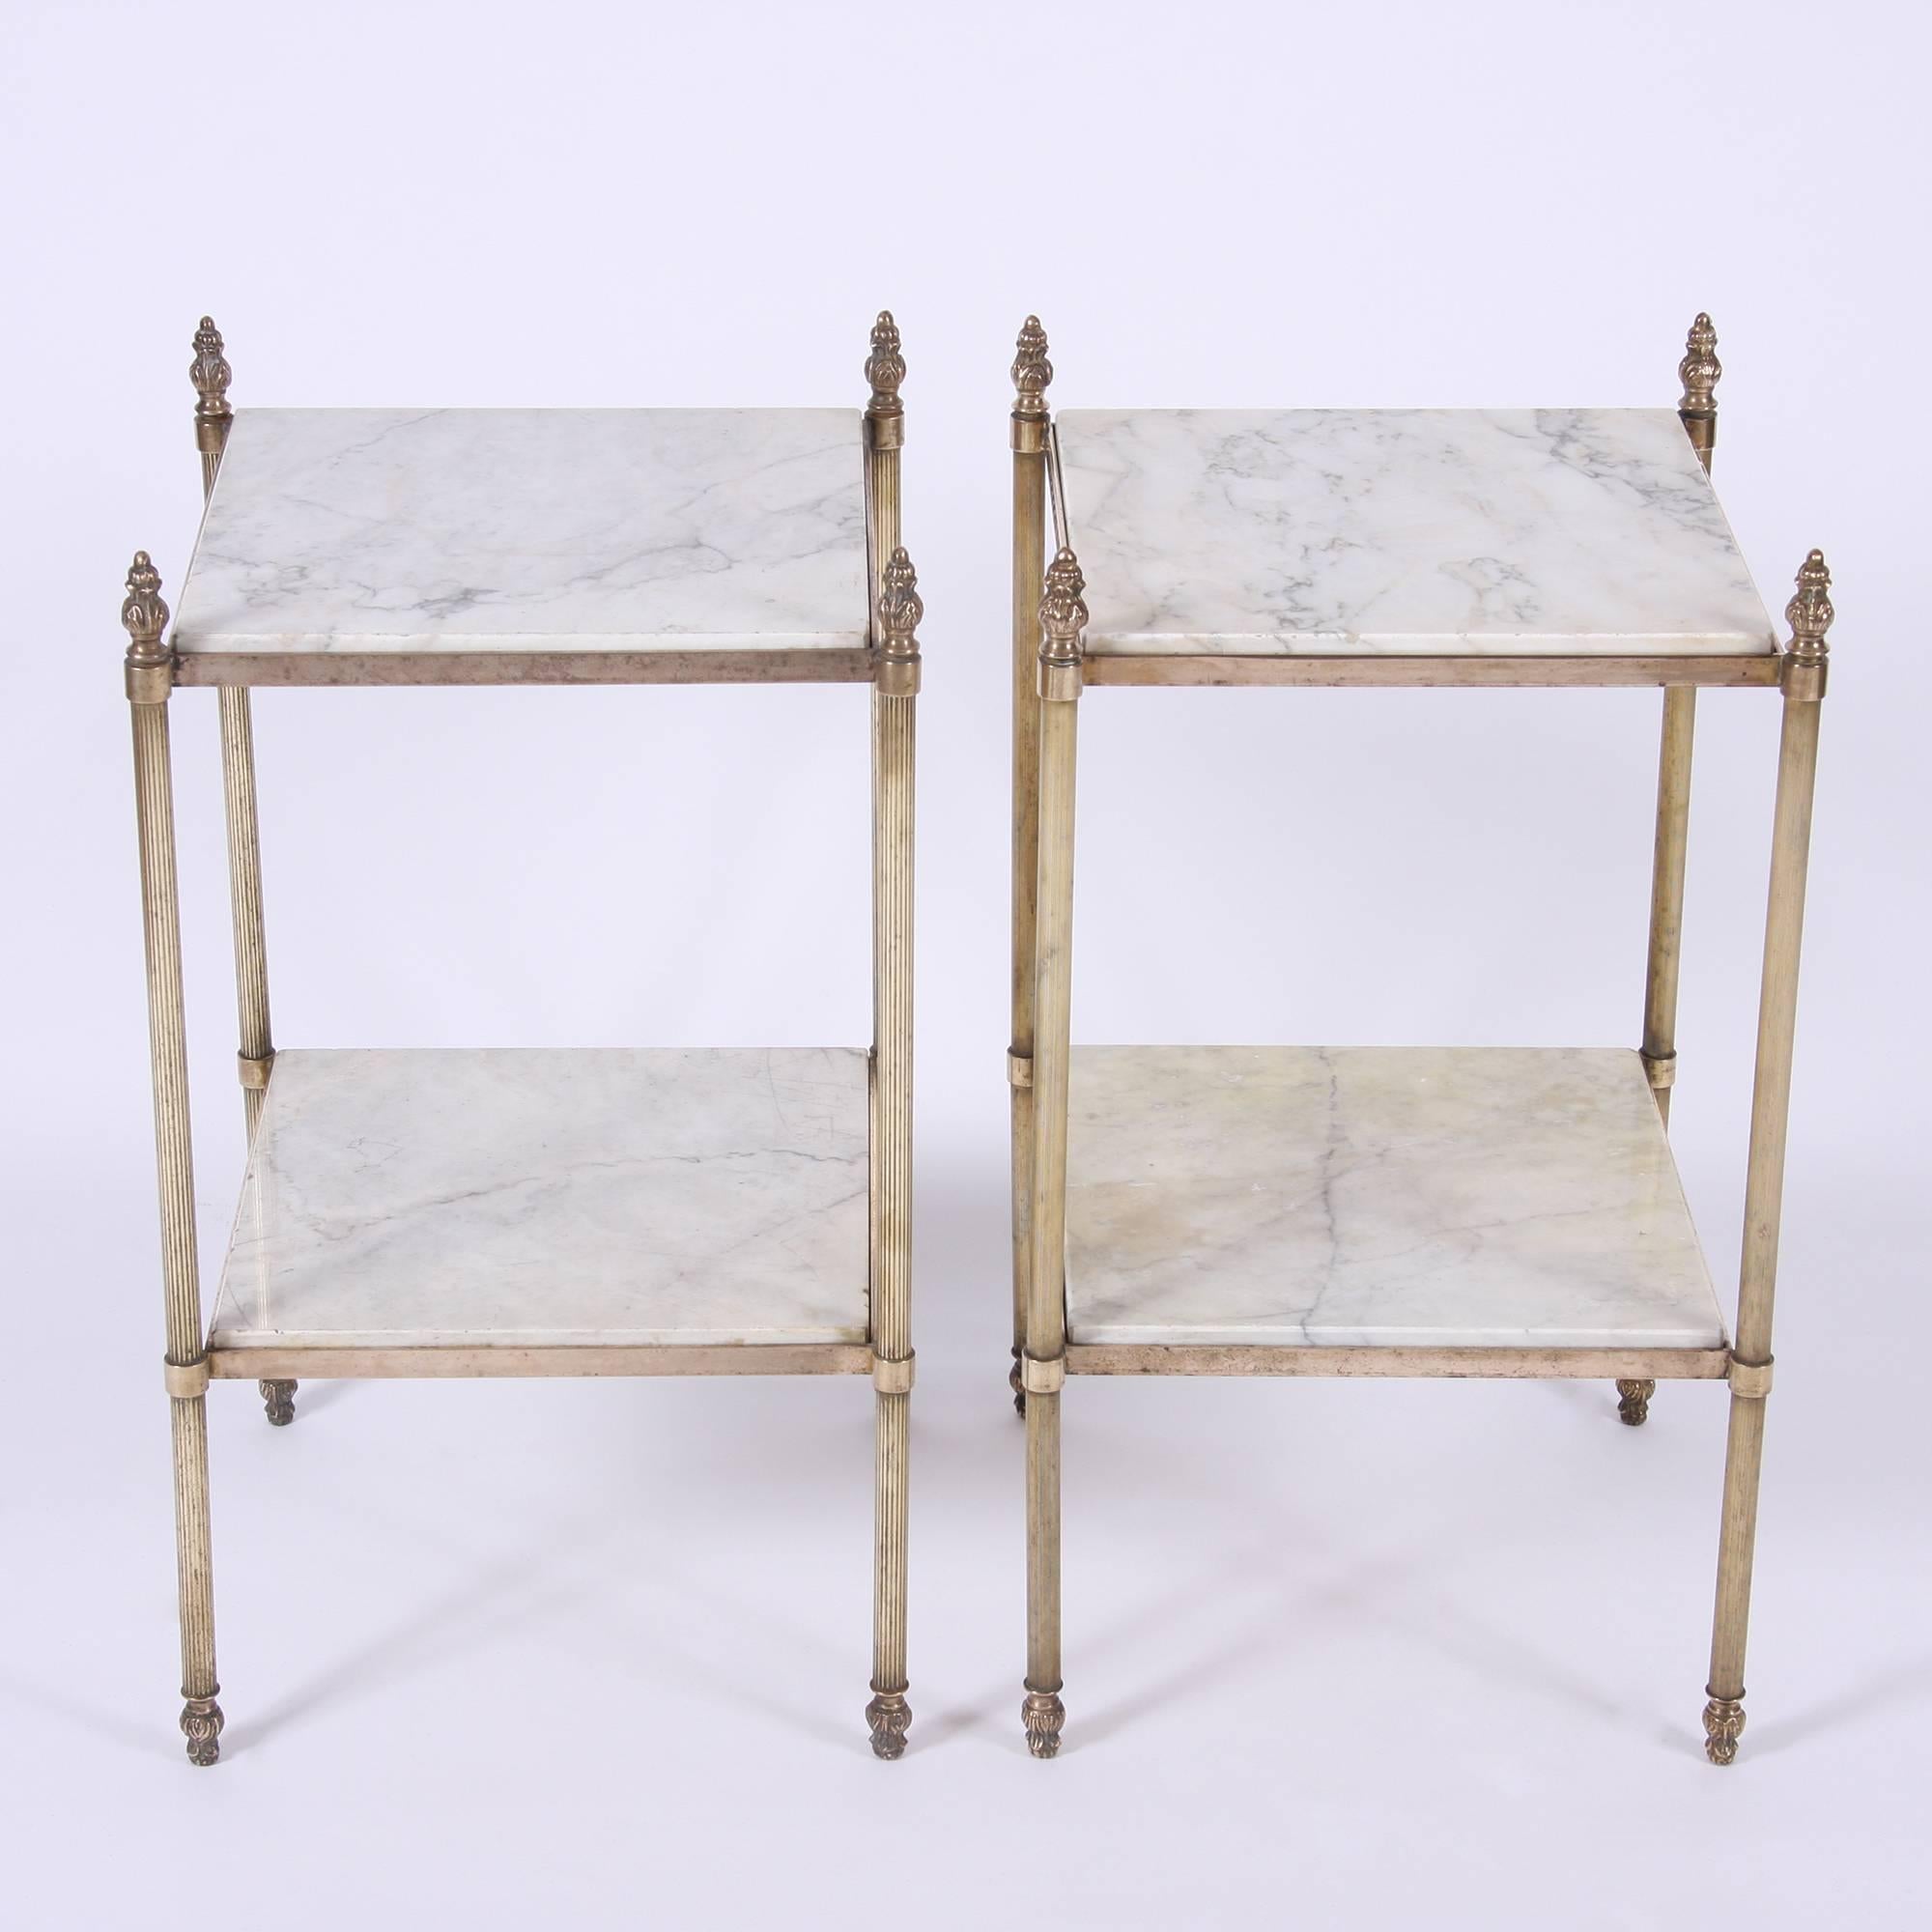 French, circa 1950

A lovely pair of brass side tables with twisted legs and decorative finials. Two-tiered with white and grey marble.